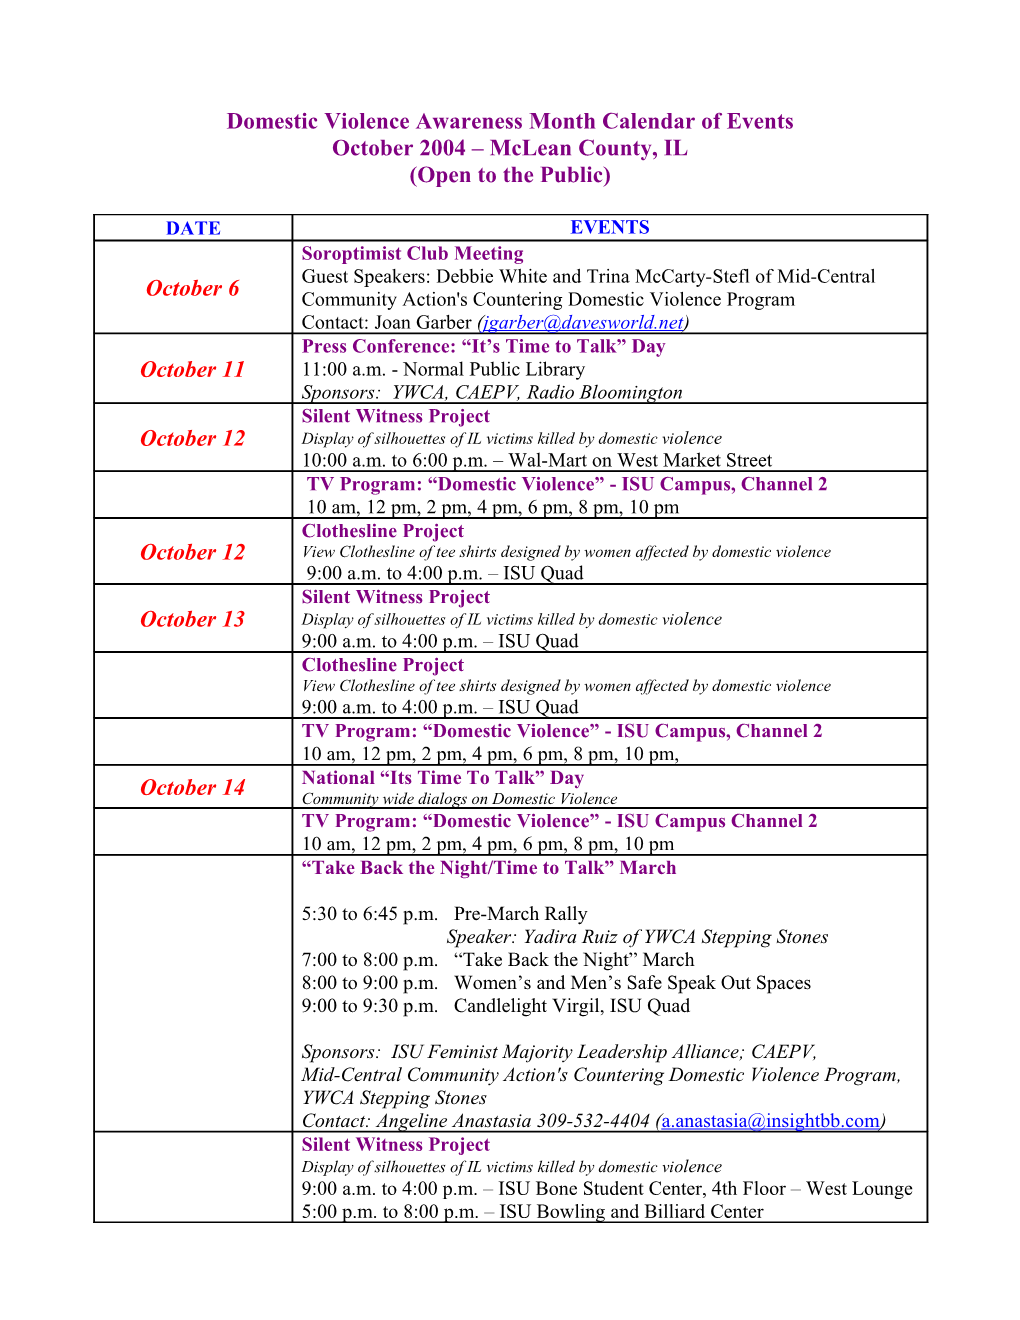 Domestic Violence Awareness Month Calendar of Events